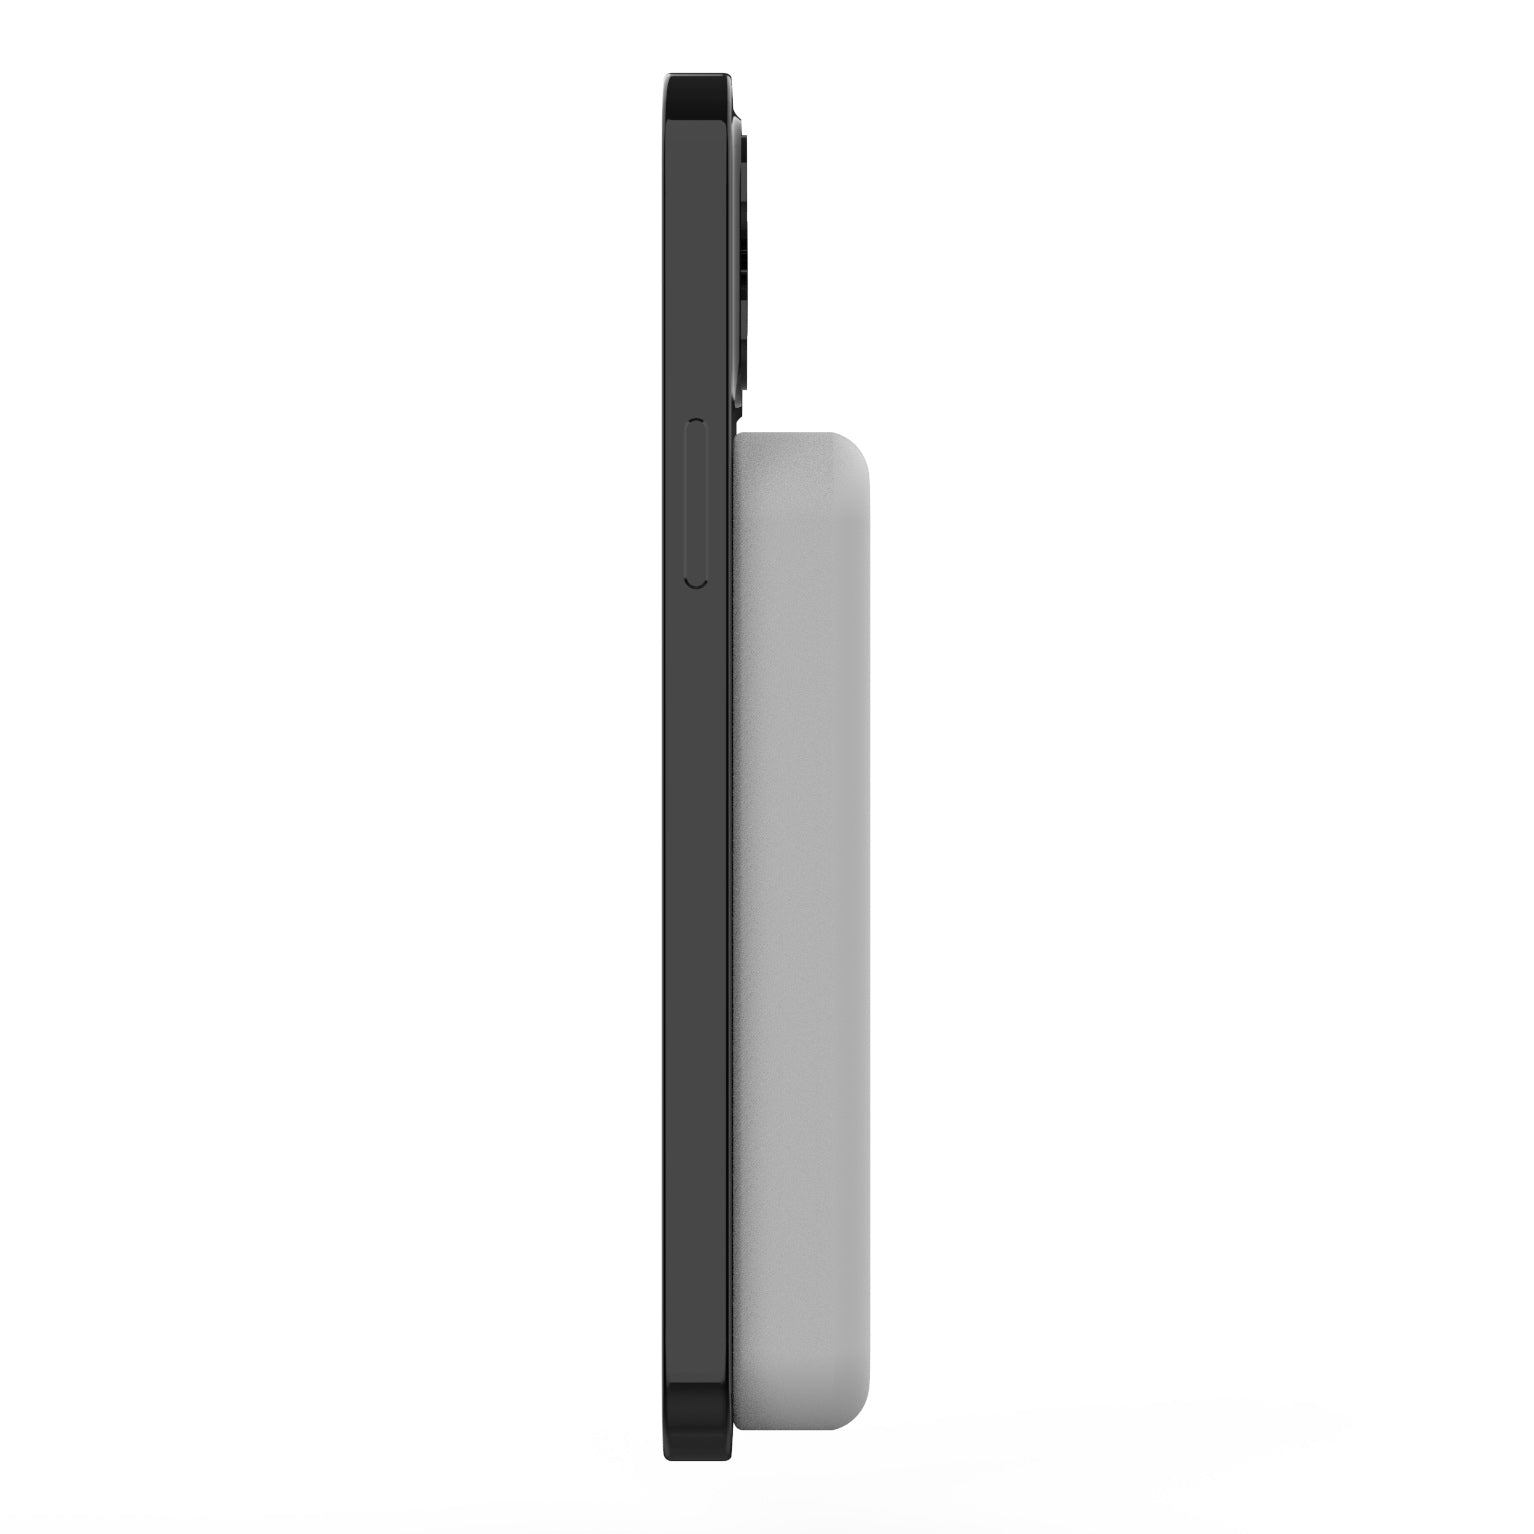 EFM FLUX 5000mAh Wireless Power Bank - With Magnetic Alignment